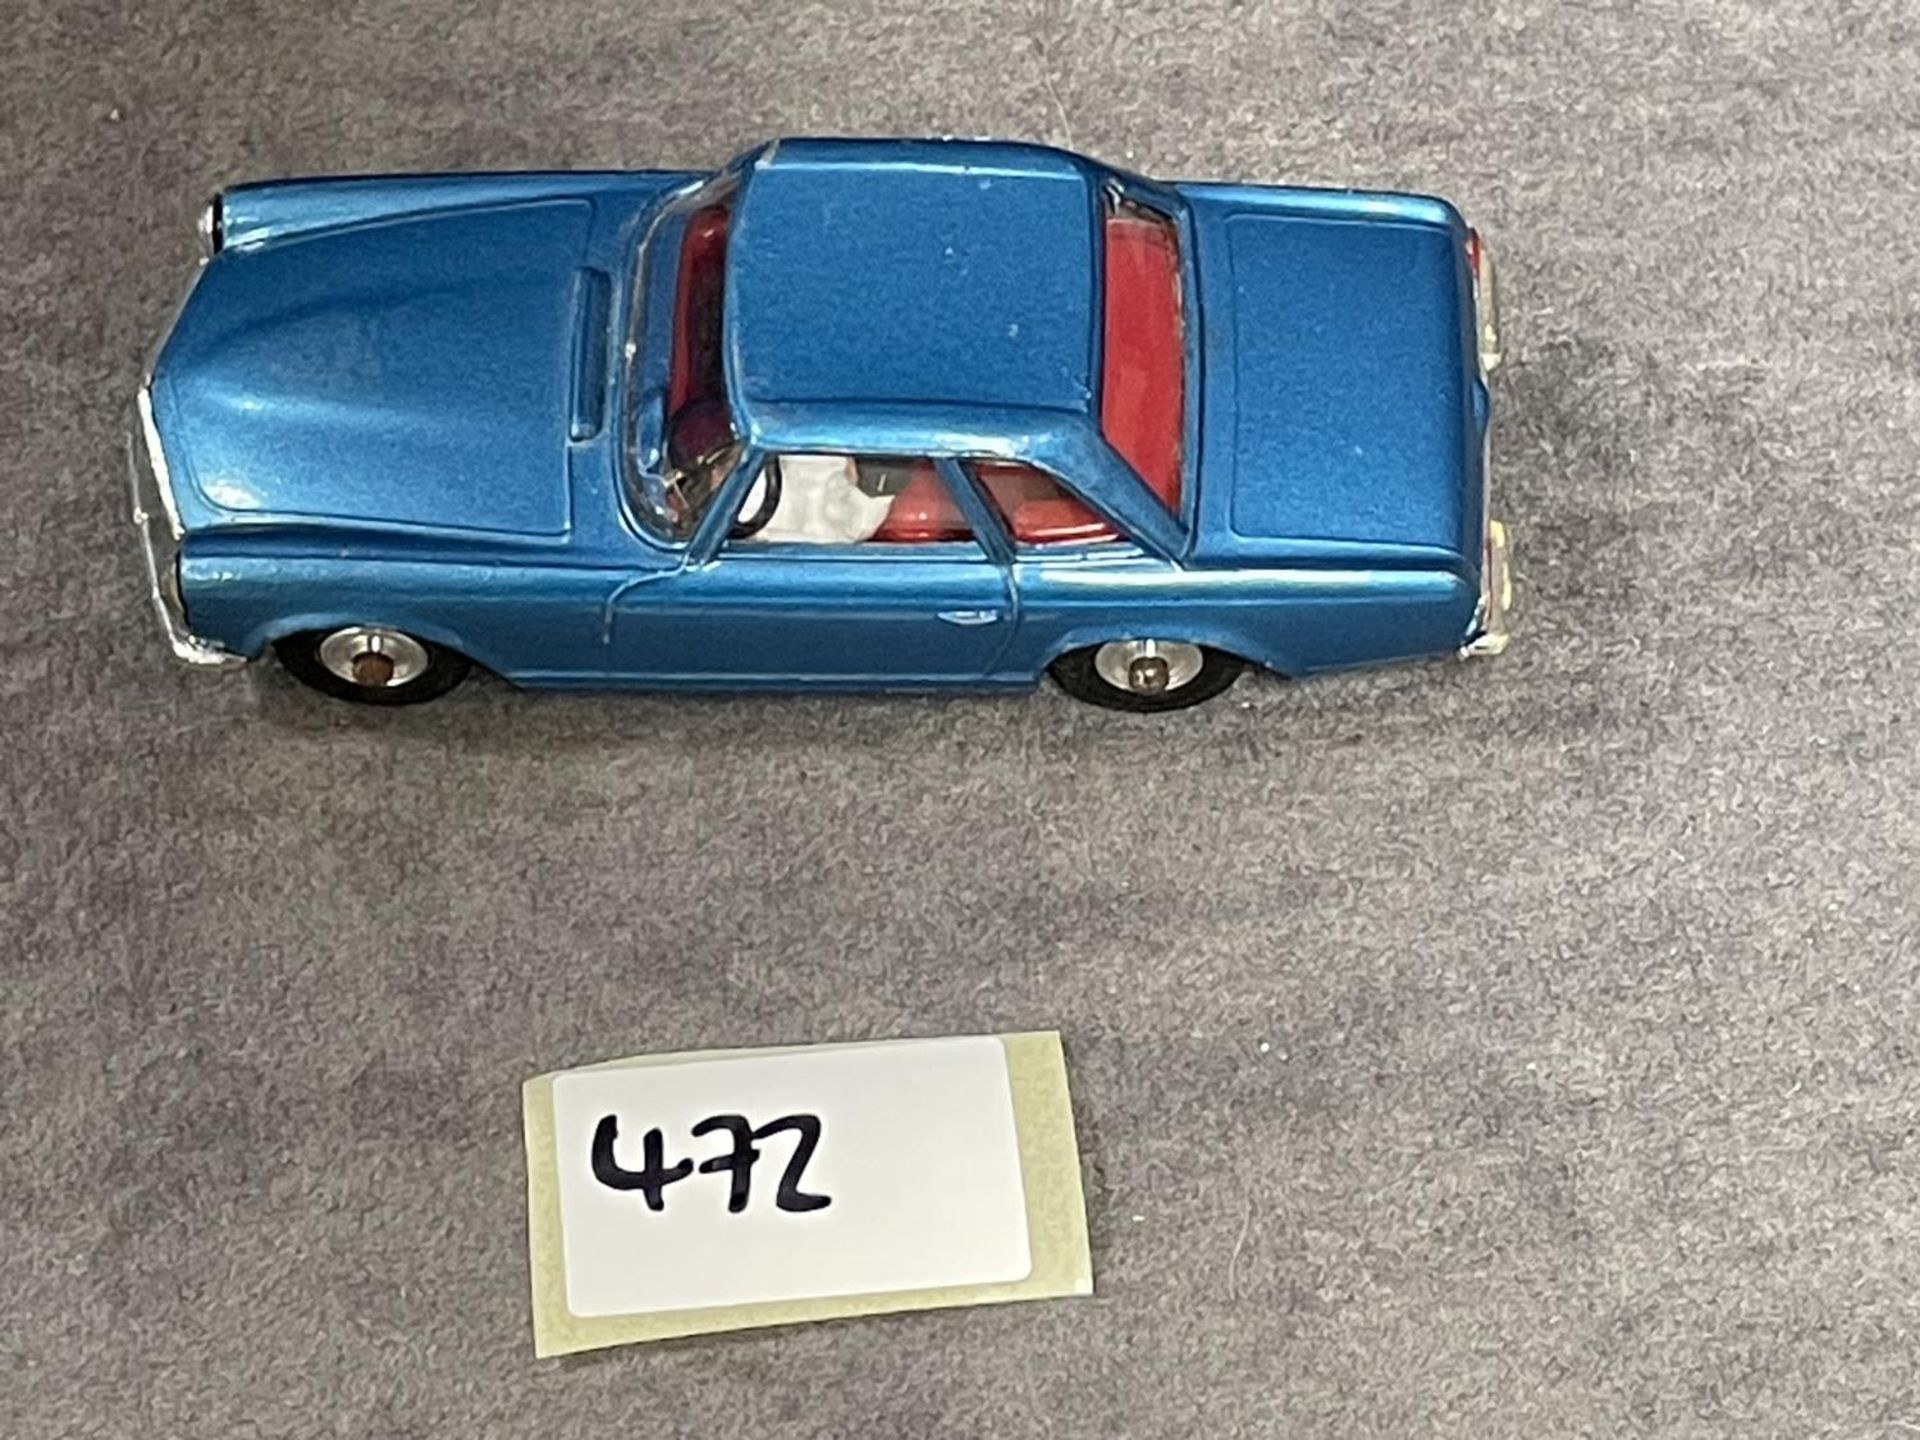 Spot-On #278 Mercedes Benz 230 SL In Metallic Blue With Red Interior Model In Excellent Condition